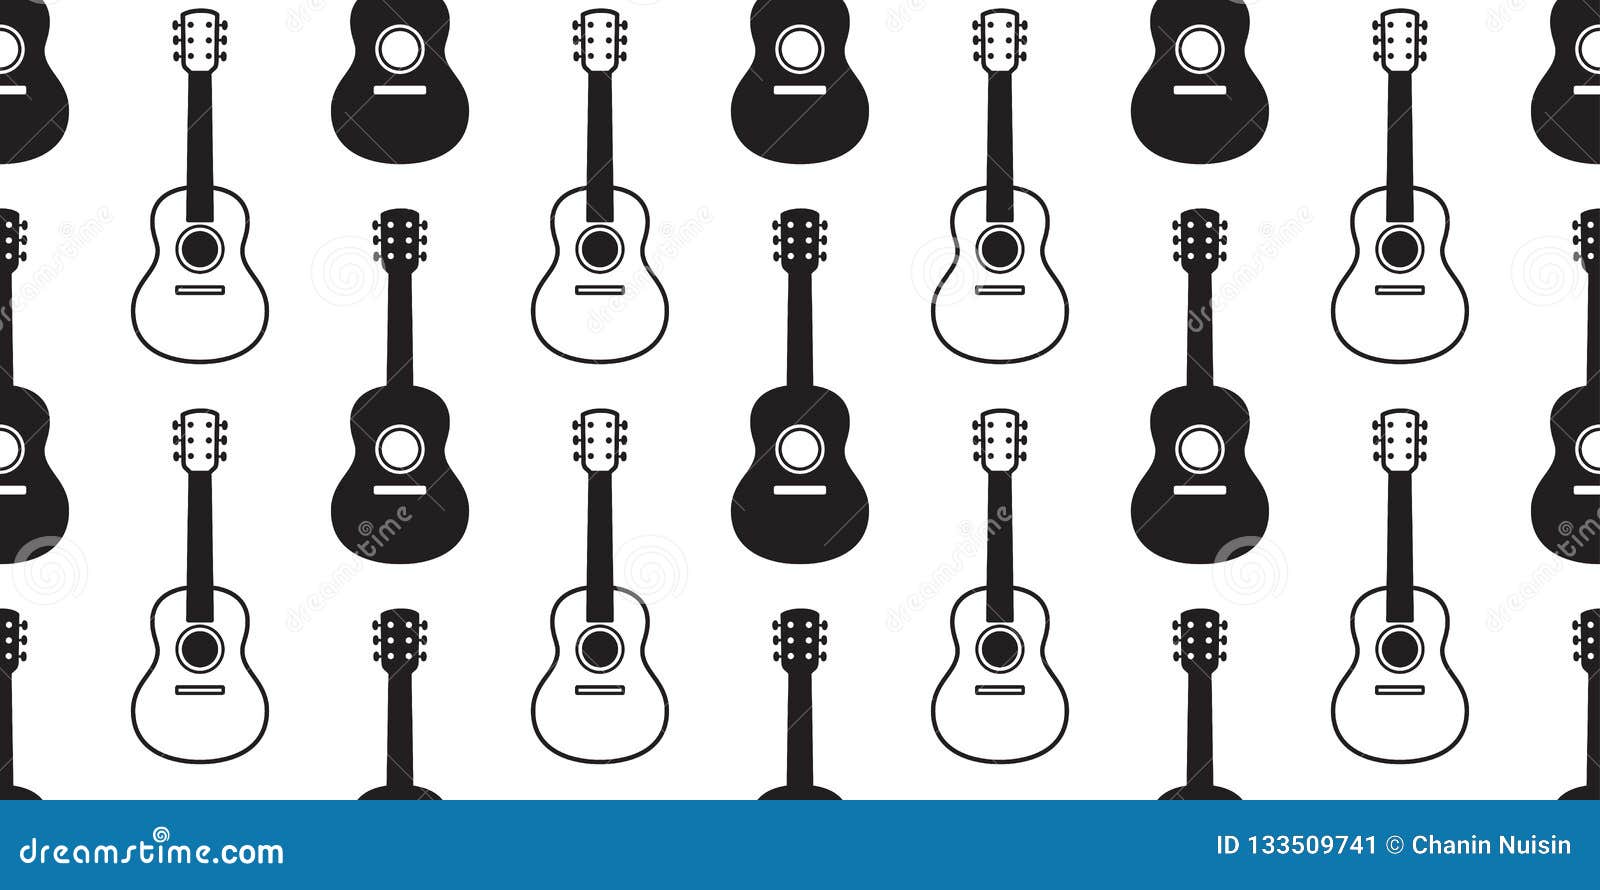 10 Best Acoustic Guitar Accessories for Beginners - Spinditty